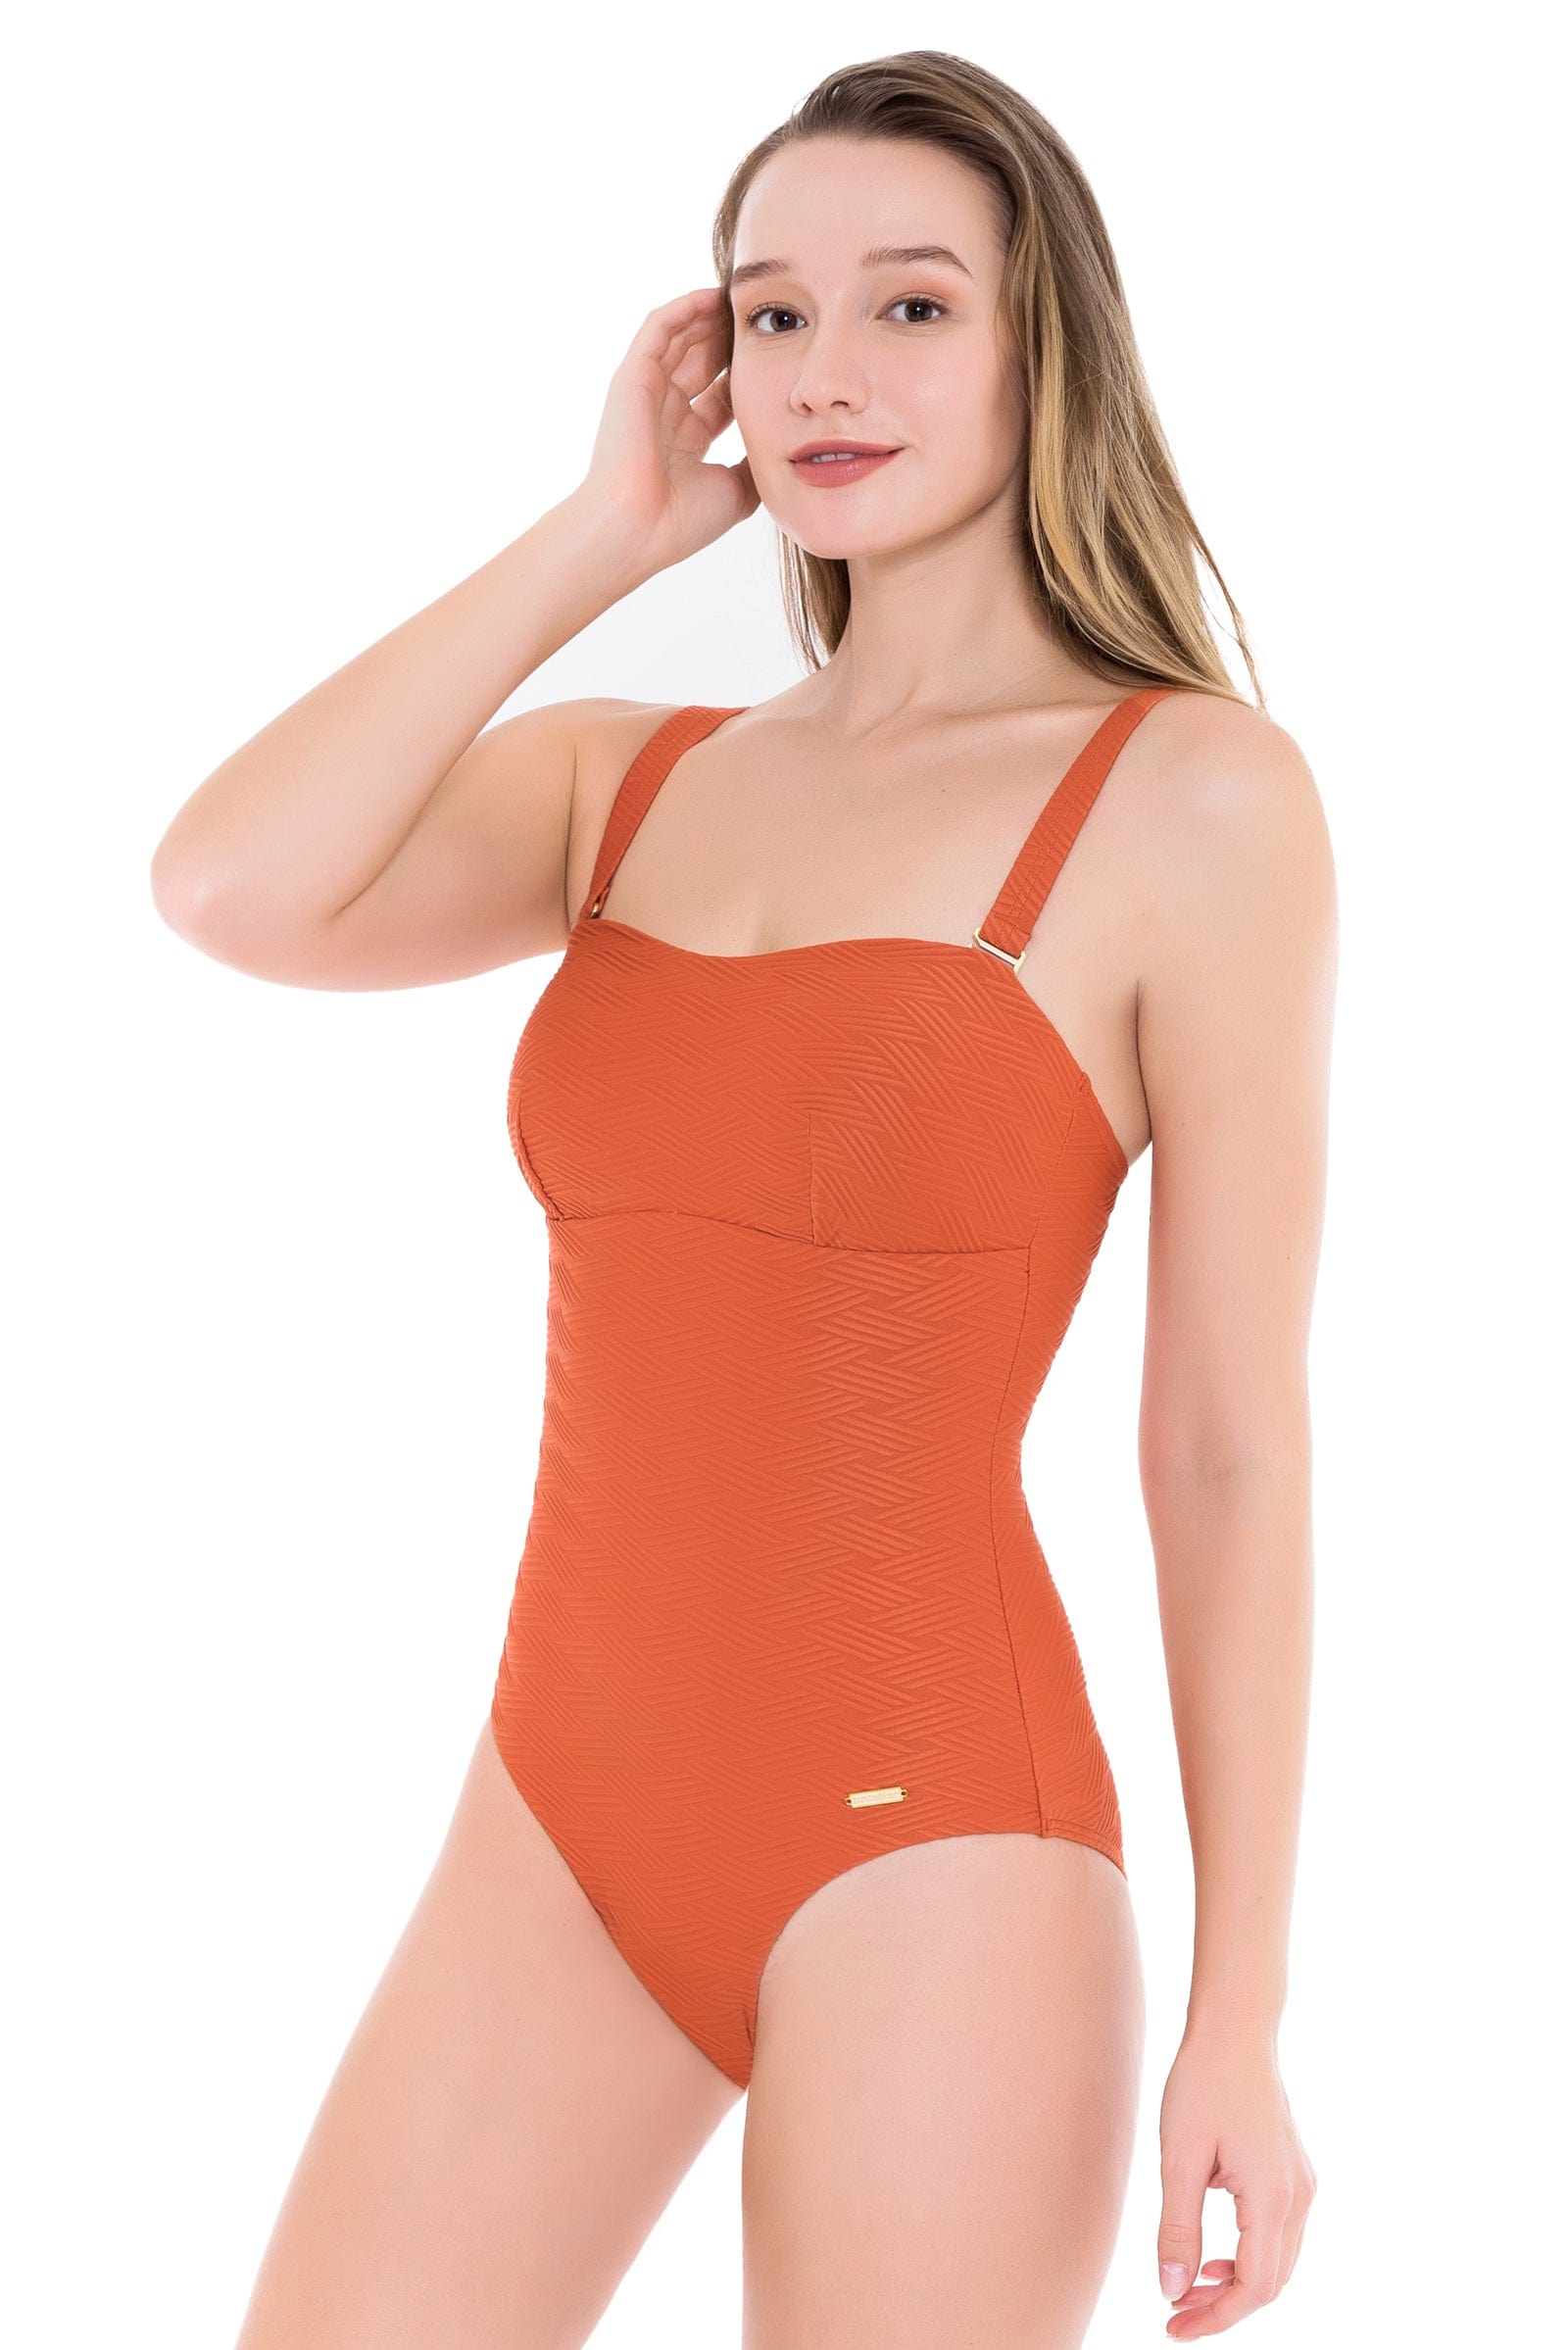 Sunkissed Texture Rust Plus Cup One Piece